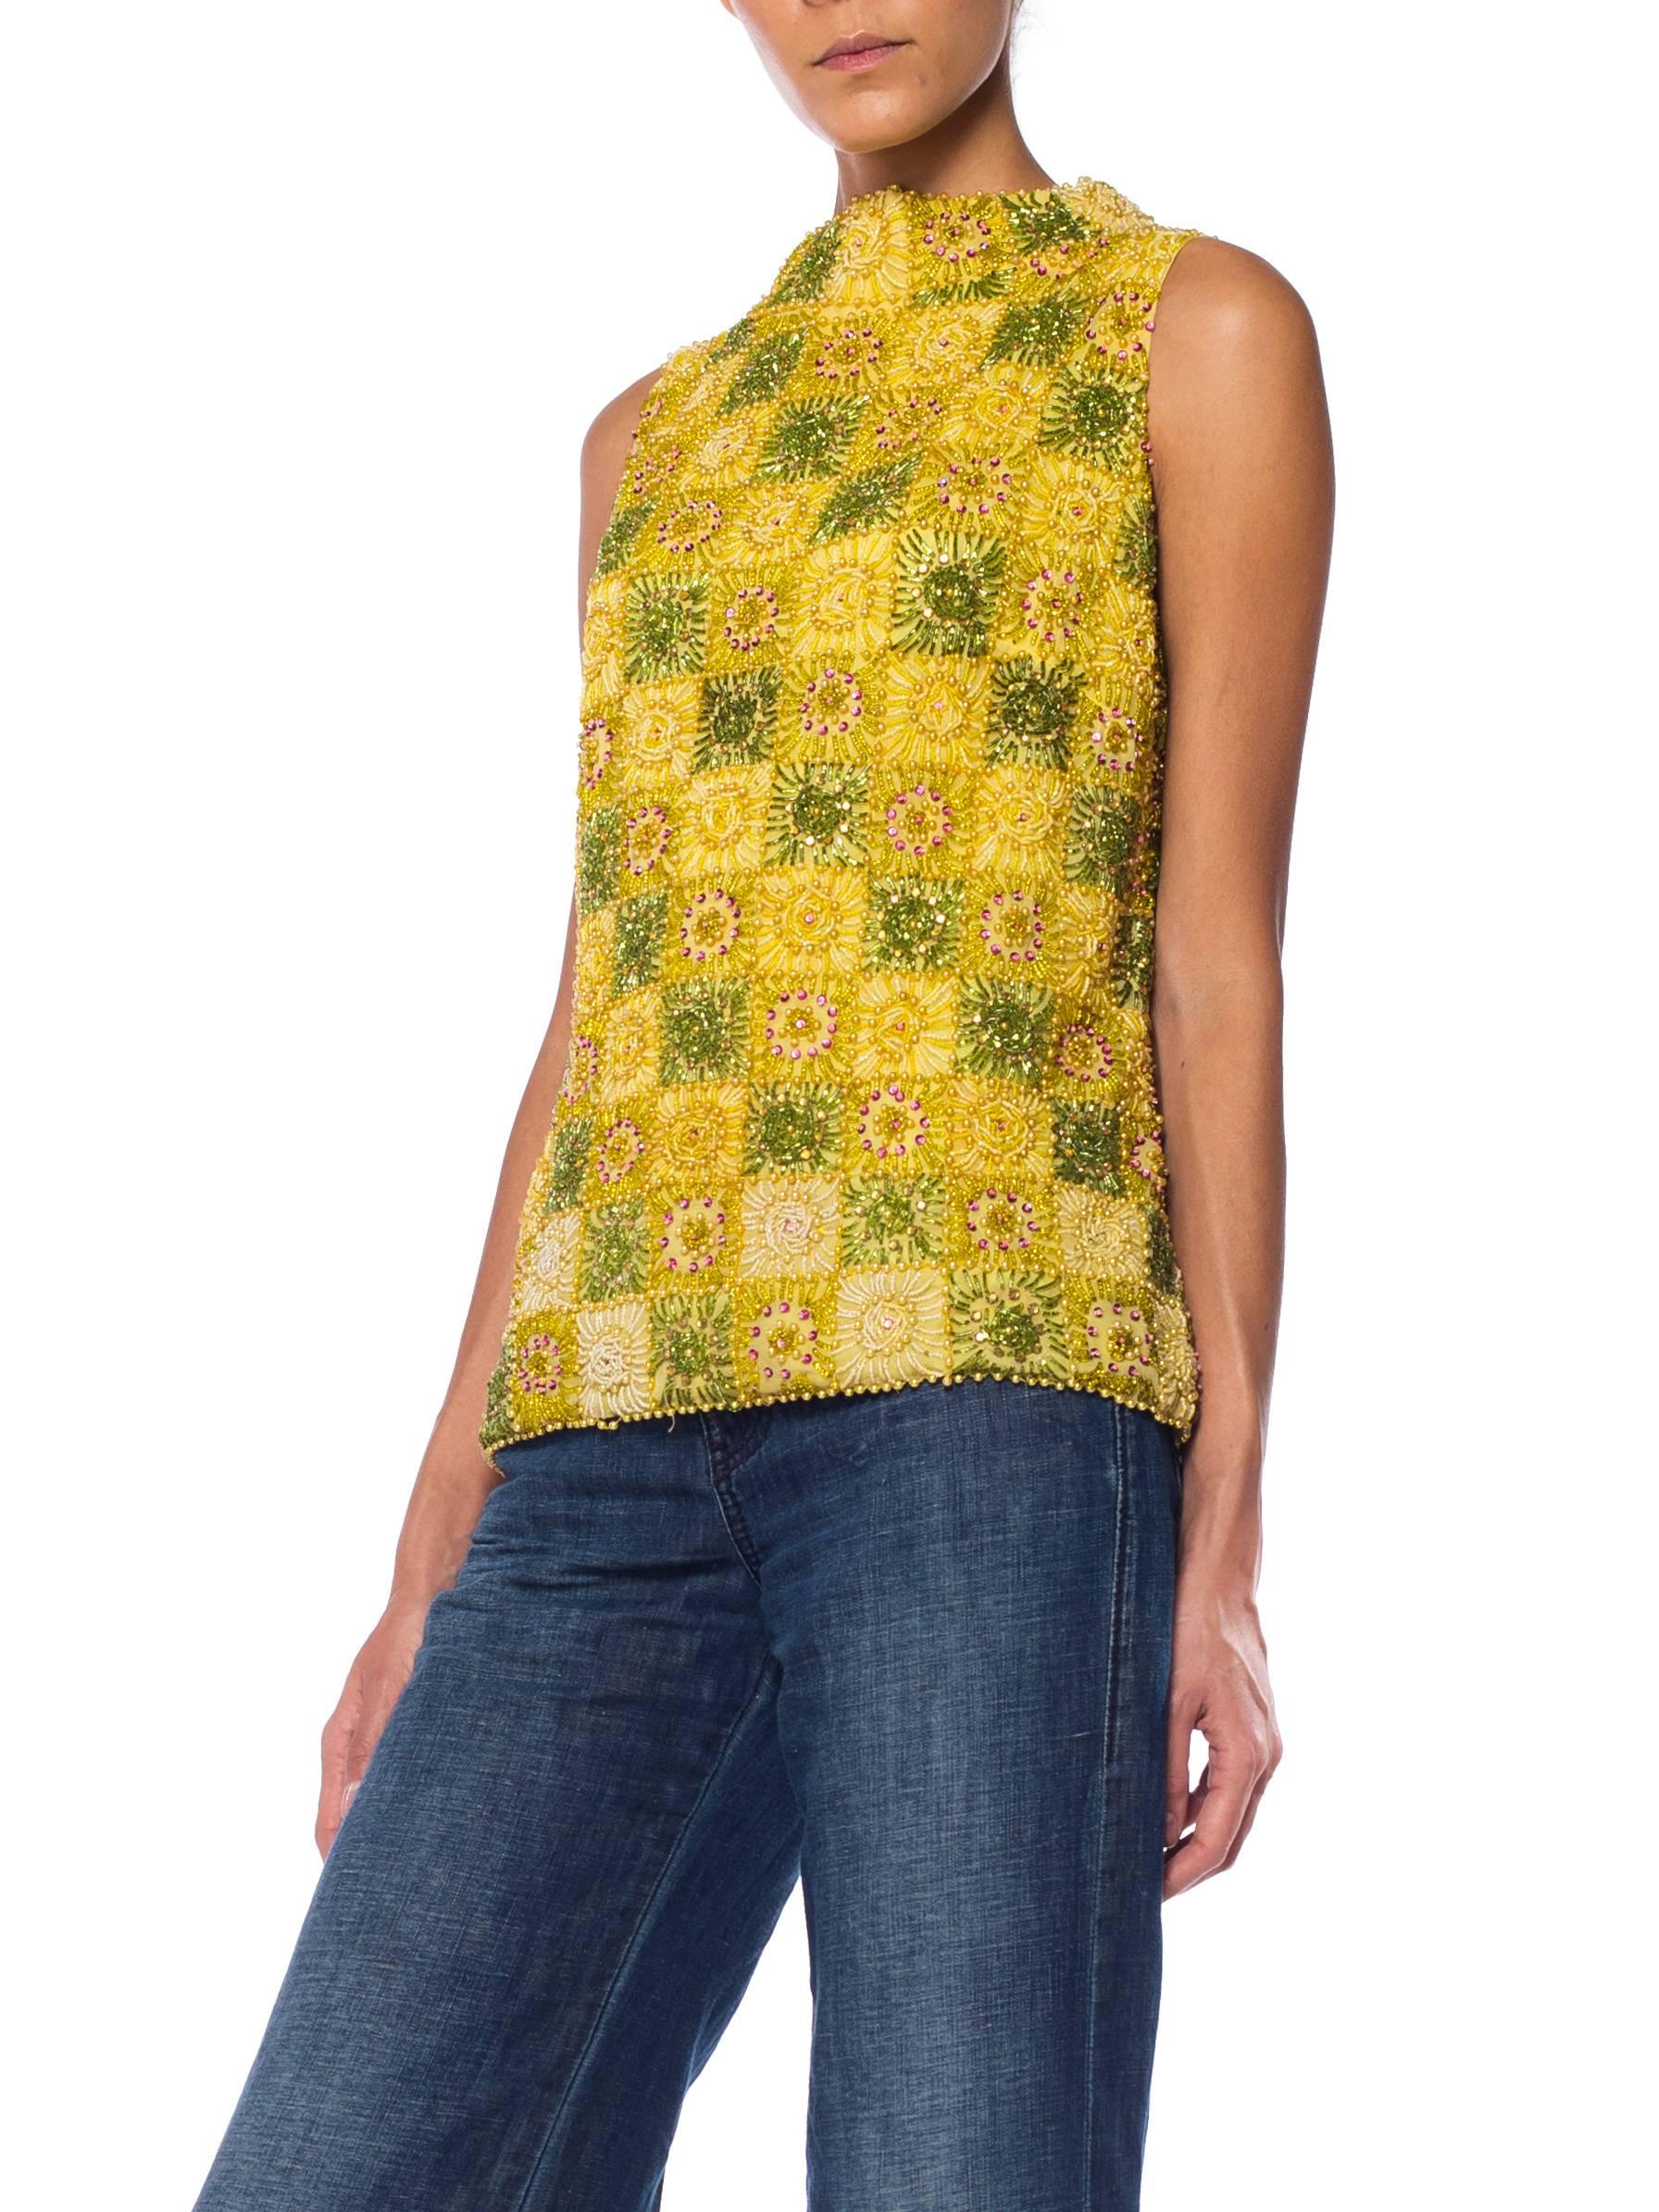 Women's 1960S Yellow Haute Couture Silk Mod Shell Top Fully Beaded With Crystals For Sale